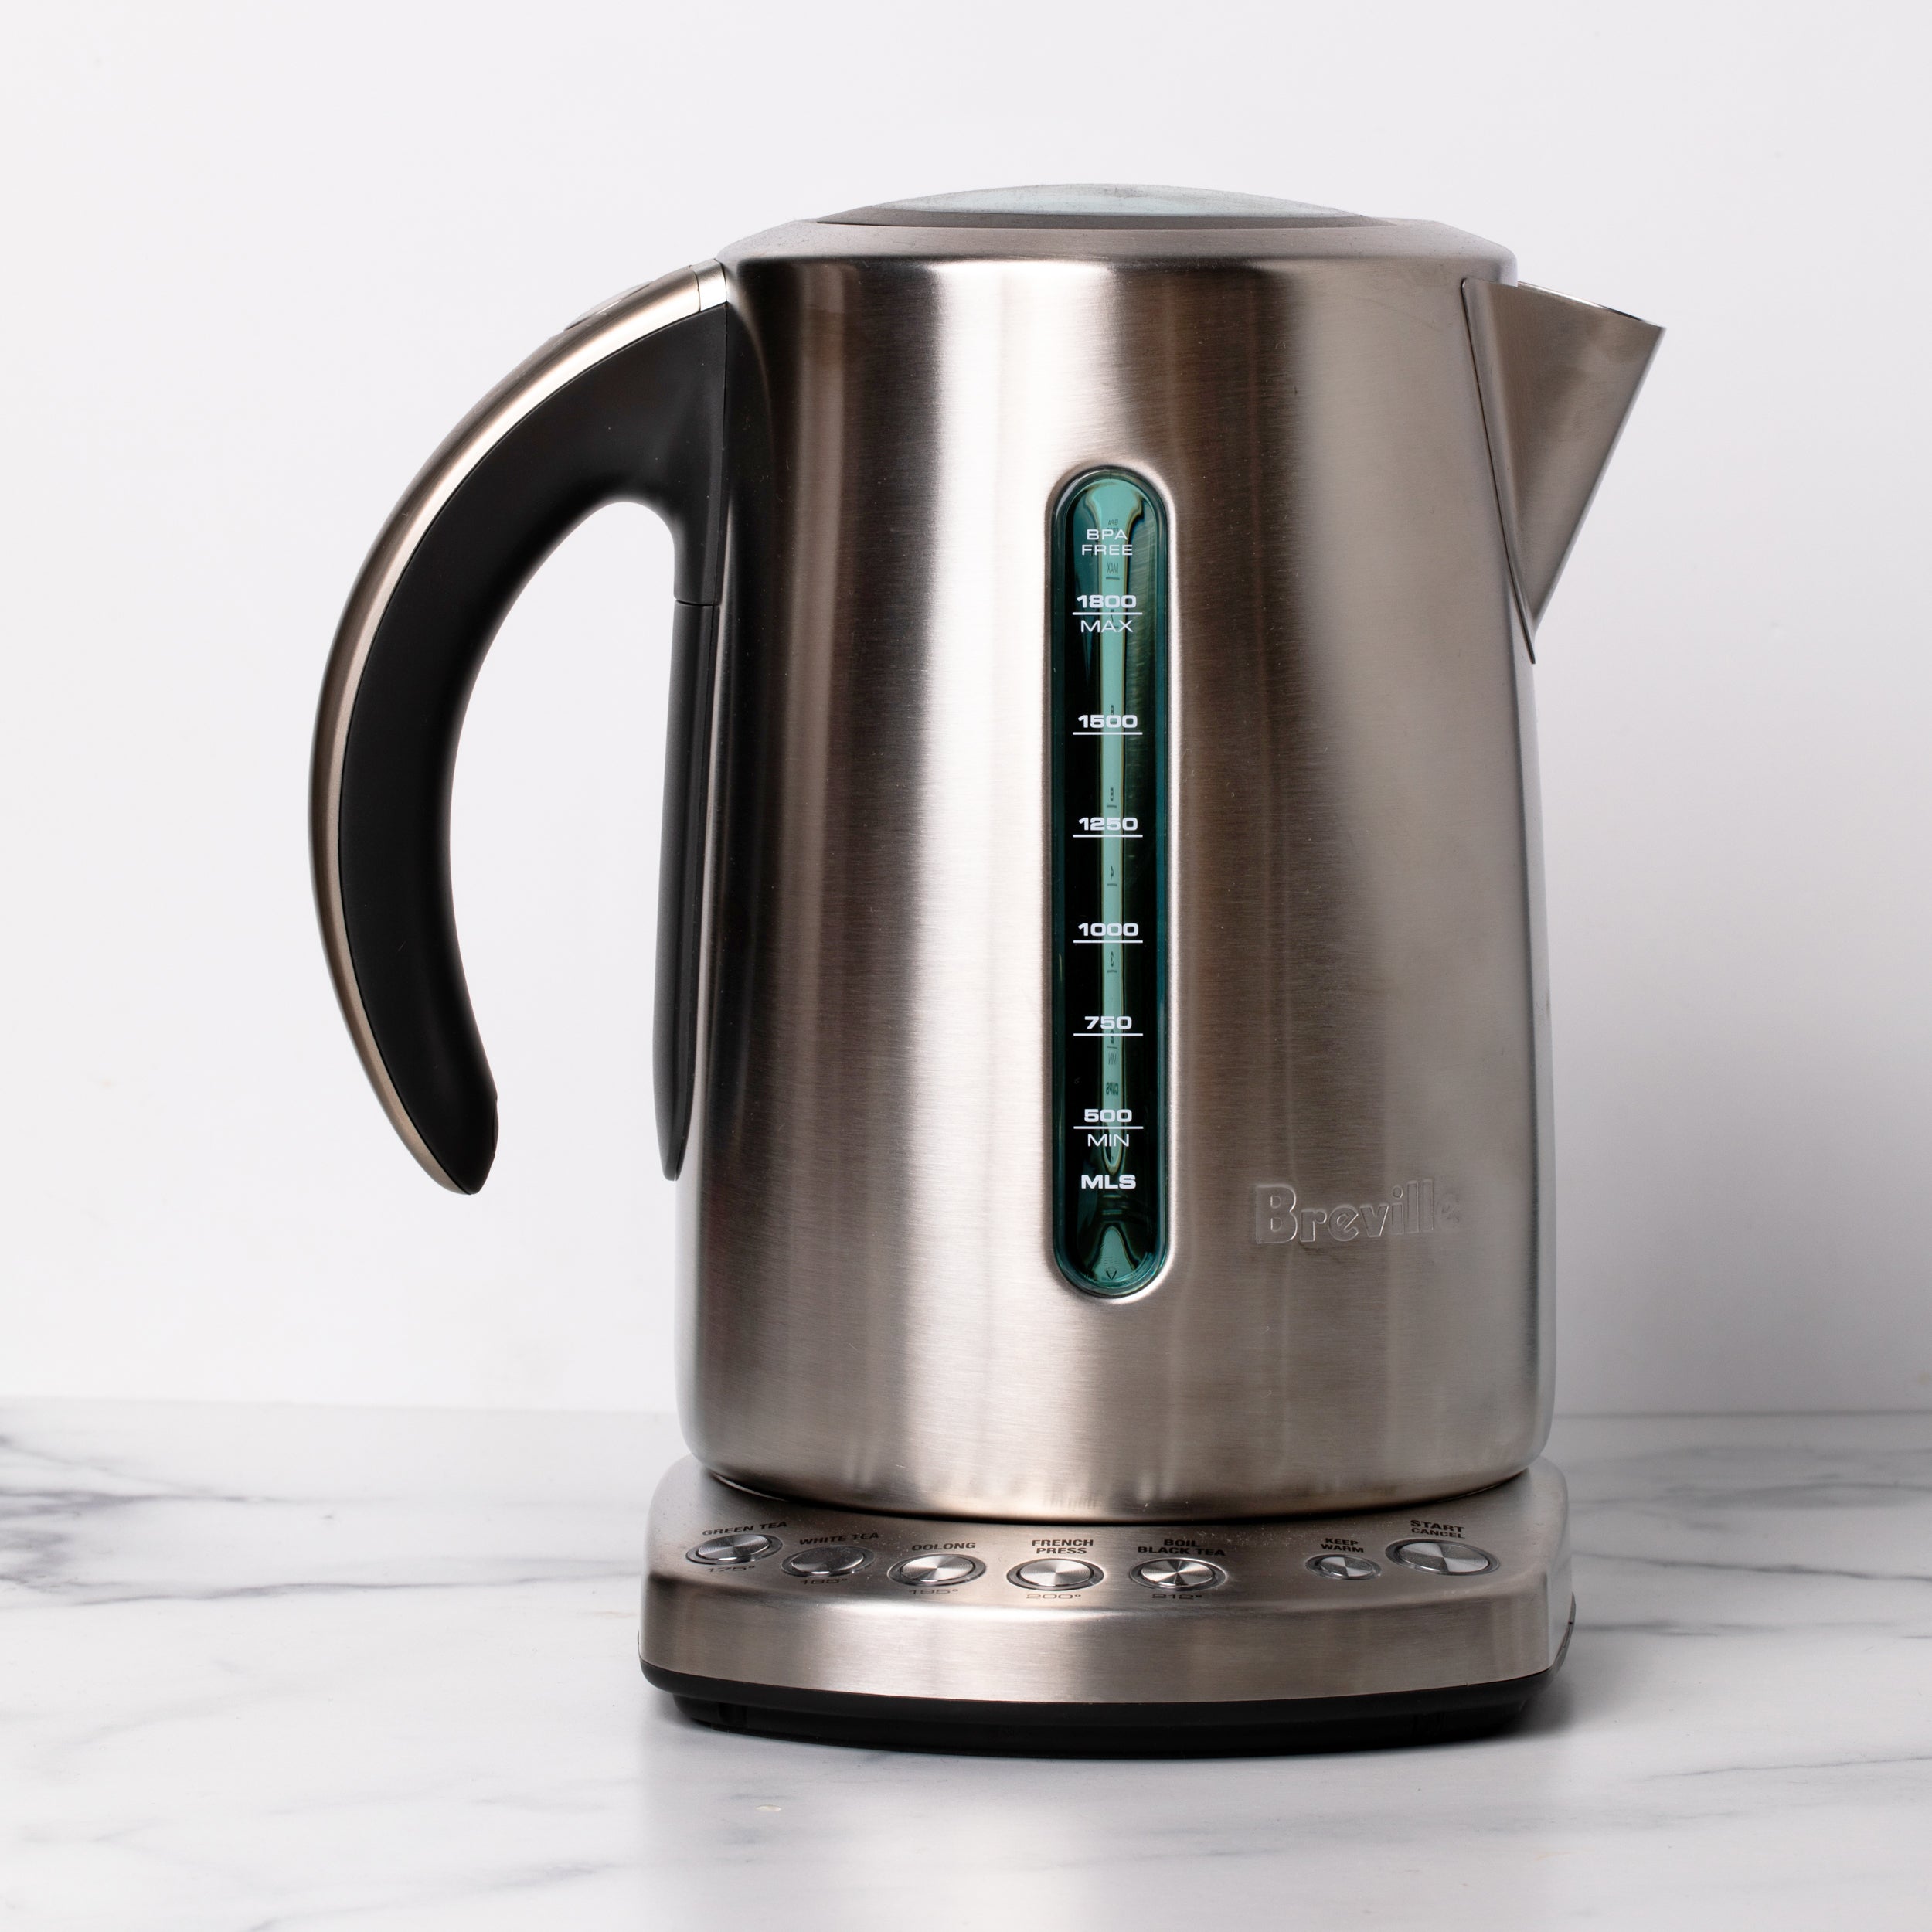 Stainless steel kettle with spout and handle on an electric base.